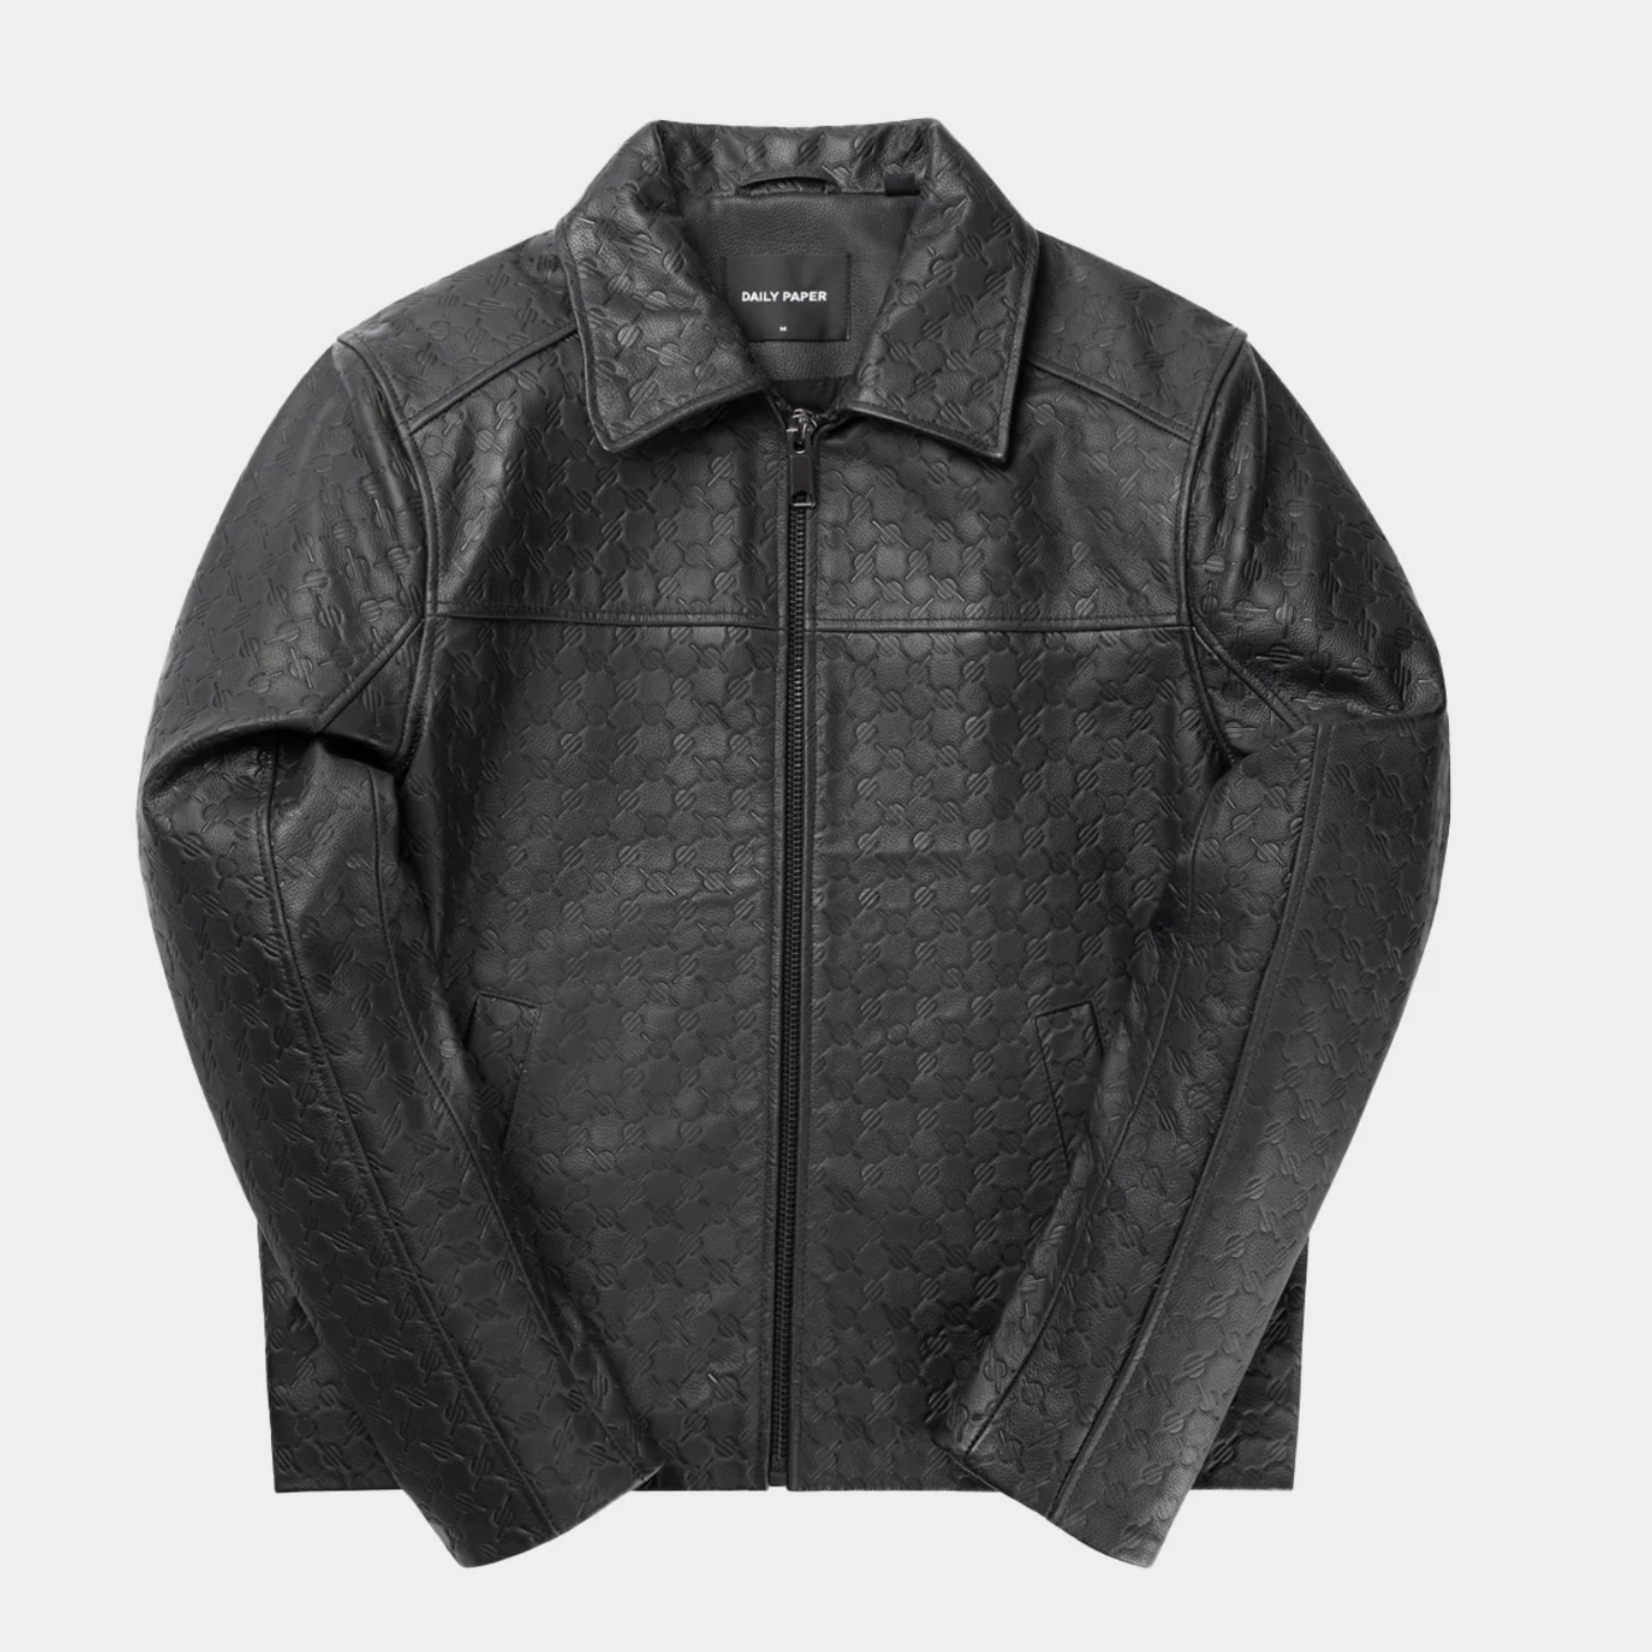 DAILY PAPER DP SILENCE MONOGRAM LEATHER JACKET